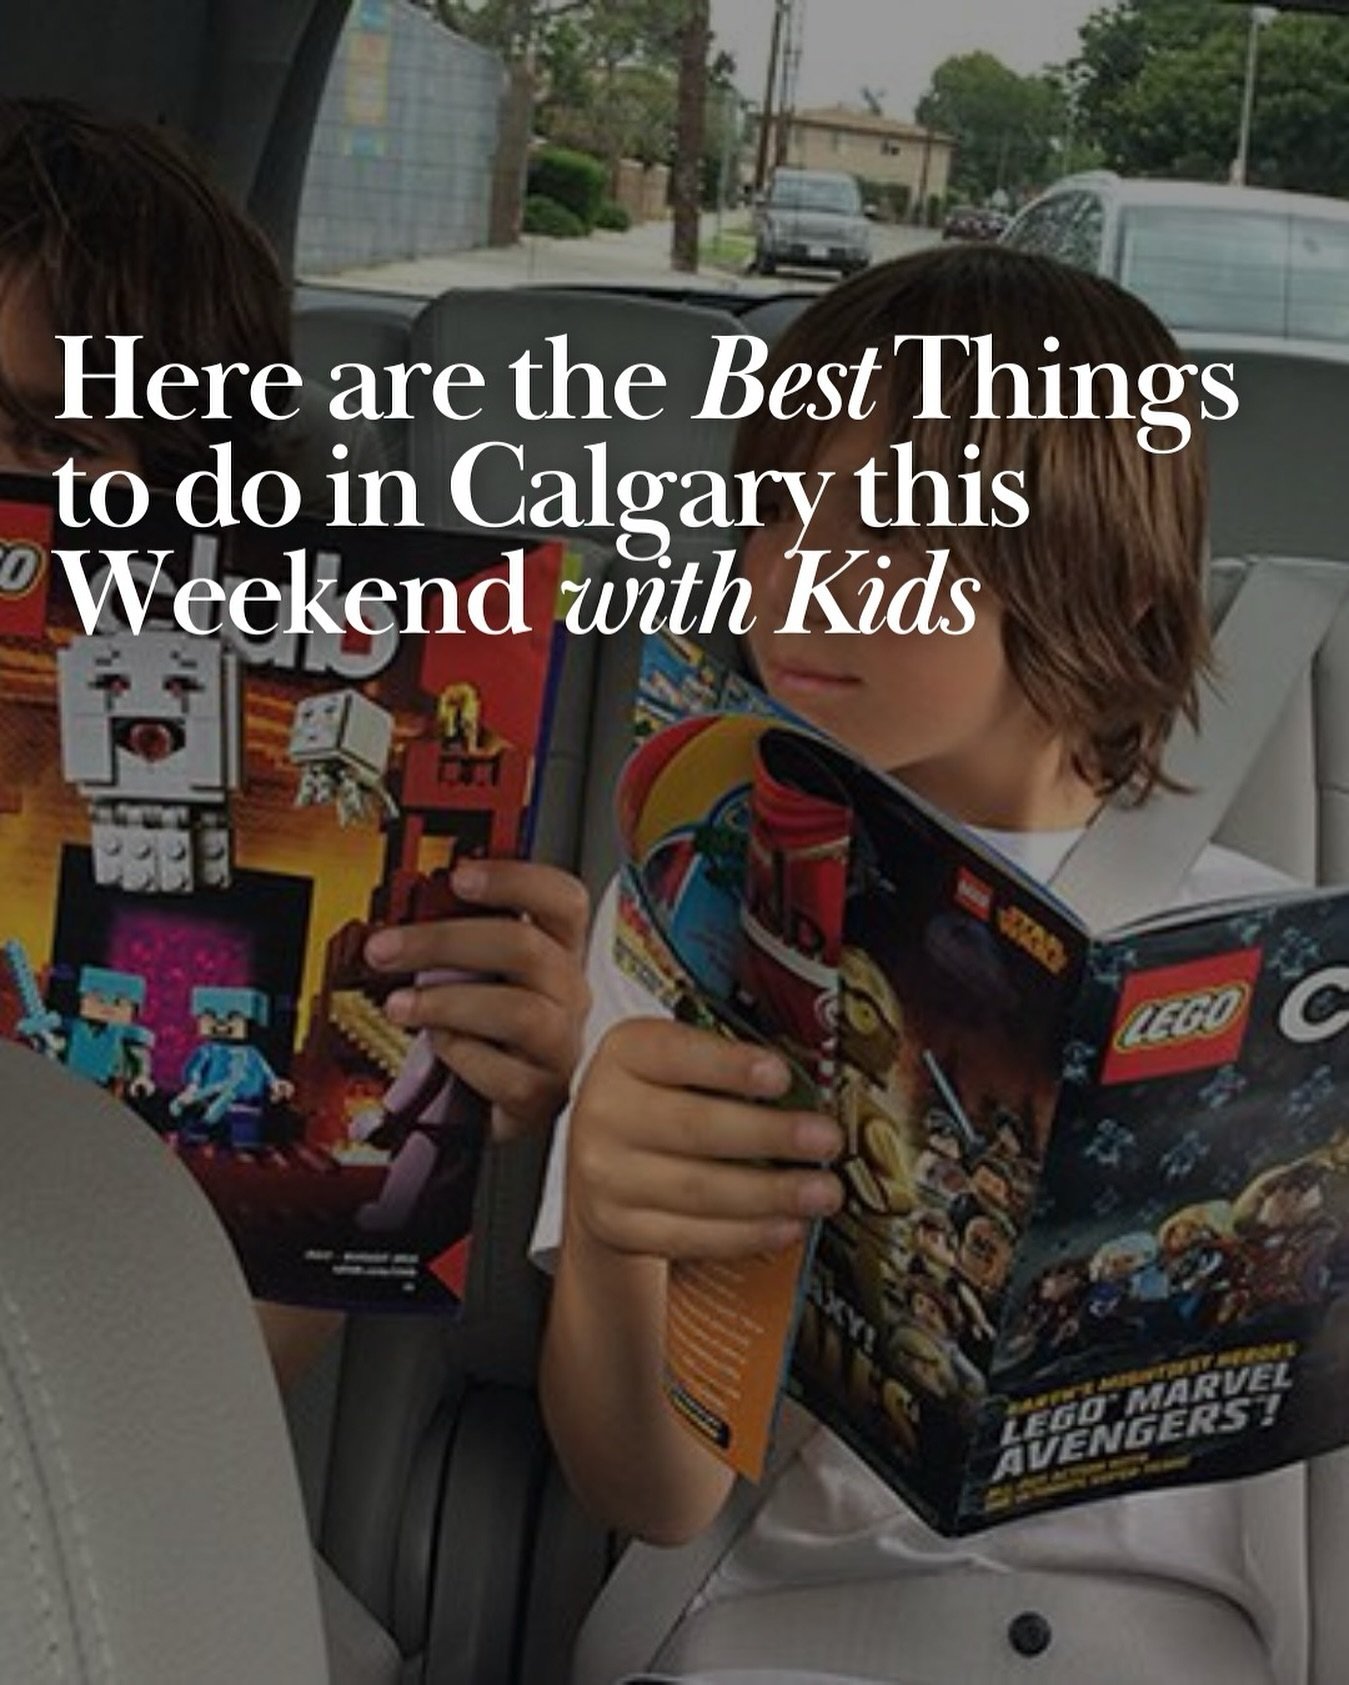 WEEKEND GUIDE! Here are the best things to do in Calgary this weekend - with kids. Pop by Trico Centre for Super Soaker Swim, or take part in @mastermindtoys and @thelegostore FREE Make &amp; Take sessions. Take part in a LEGO competition, a Nature C